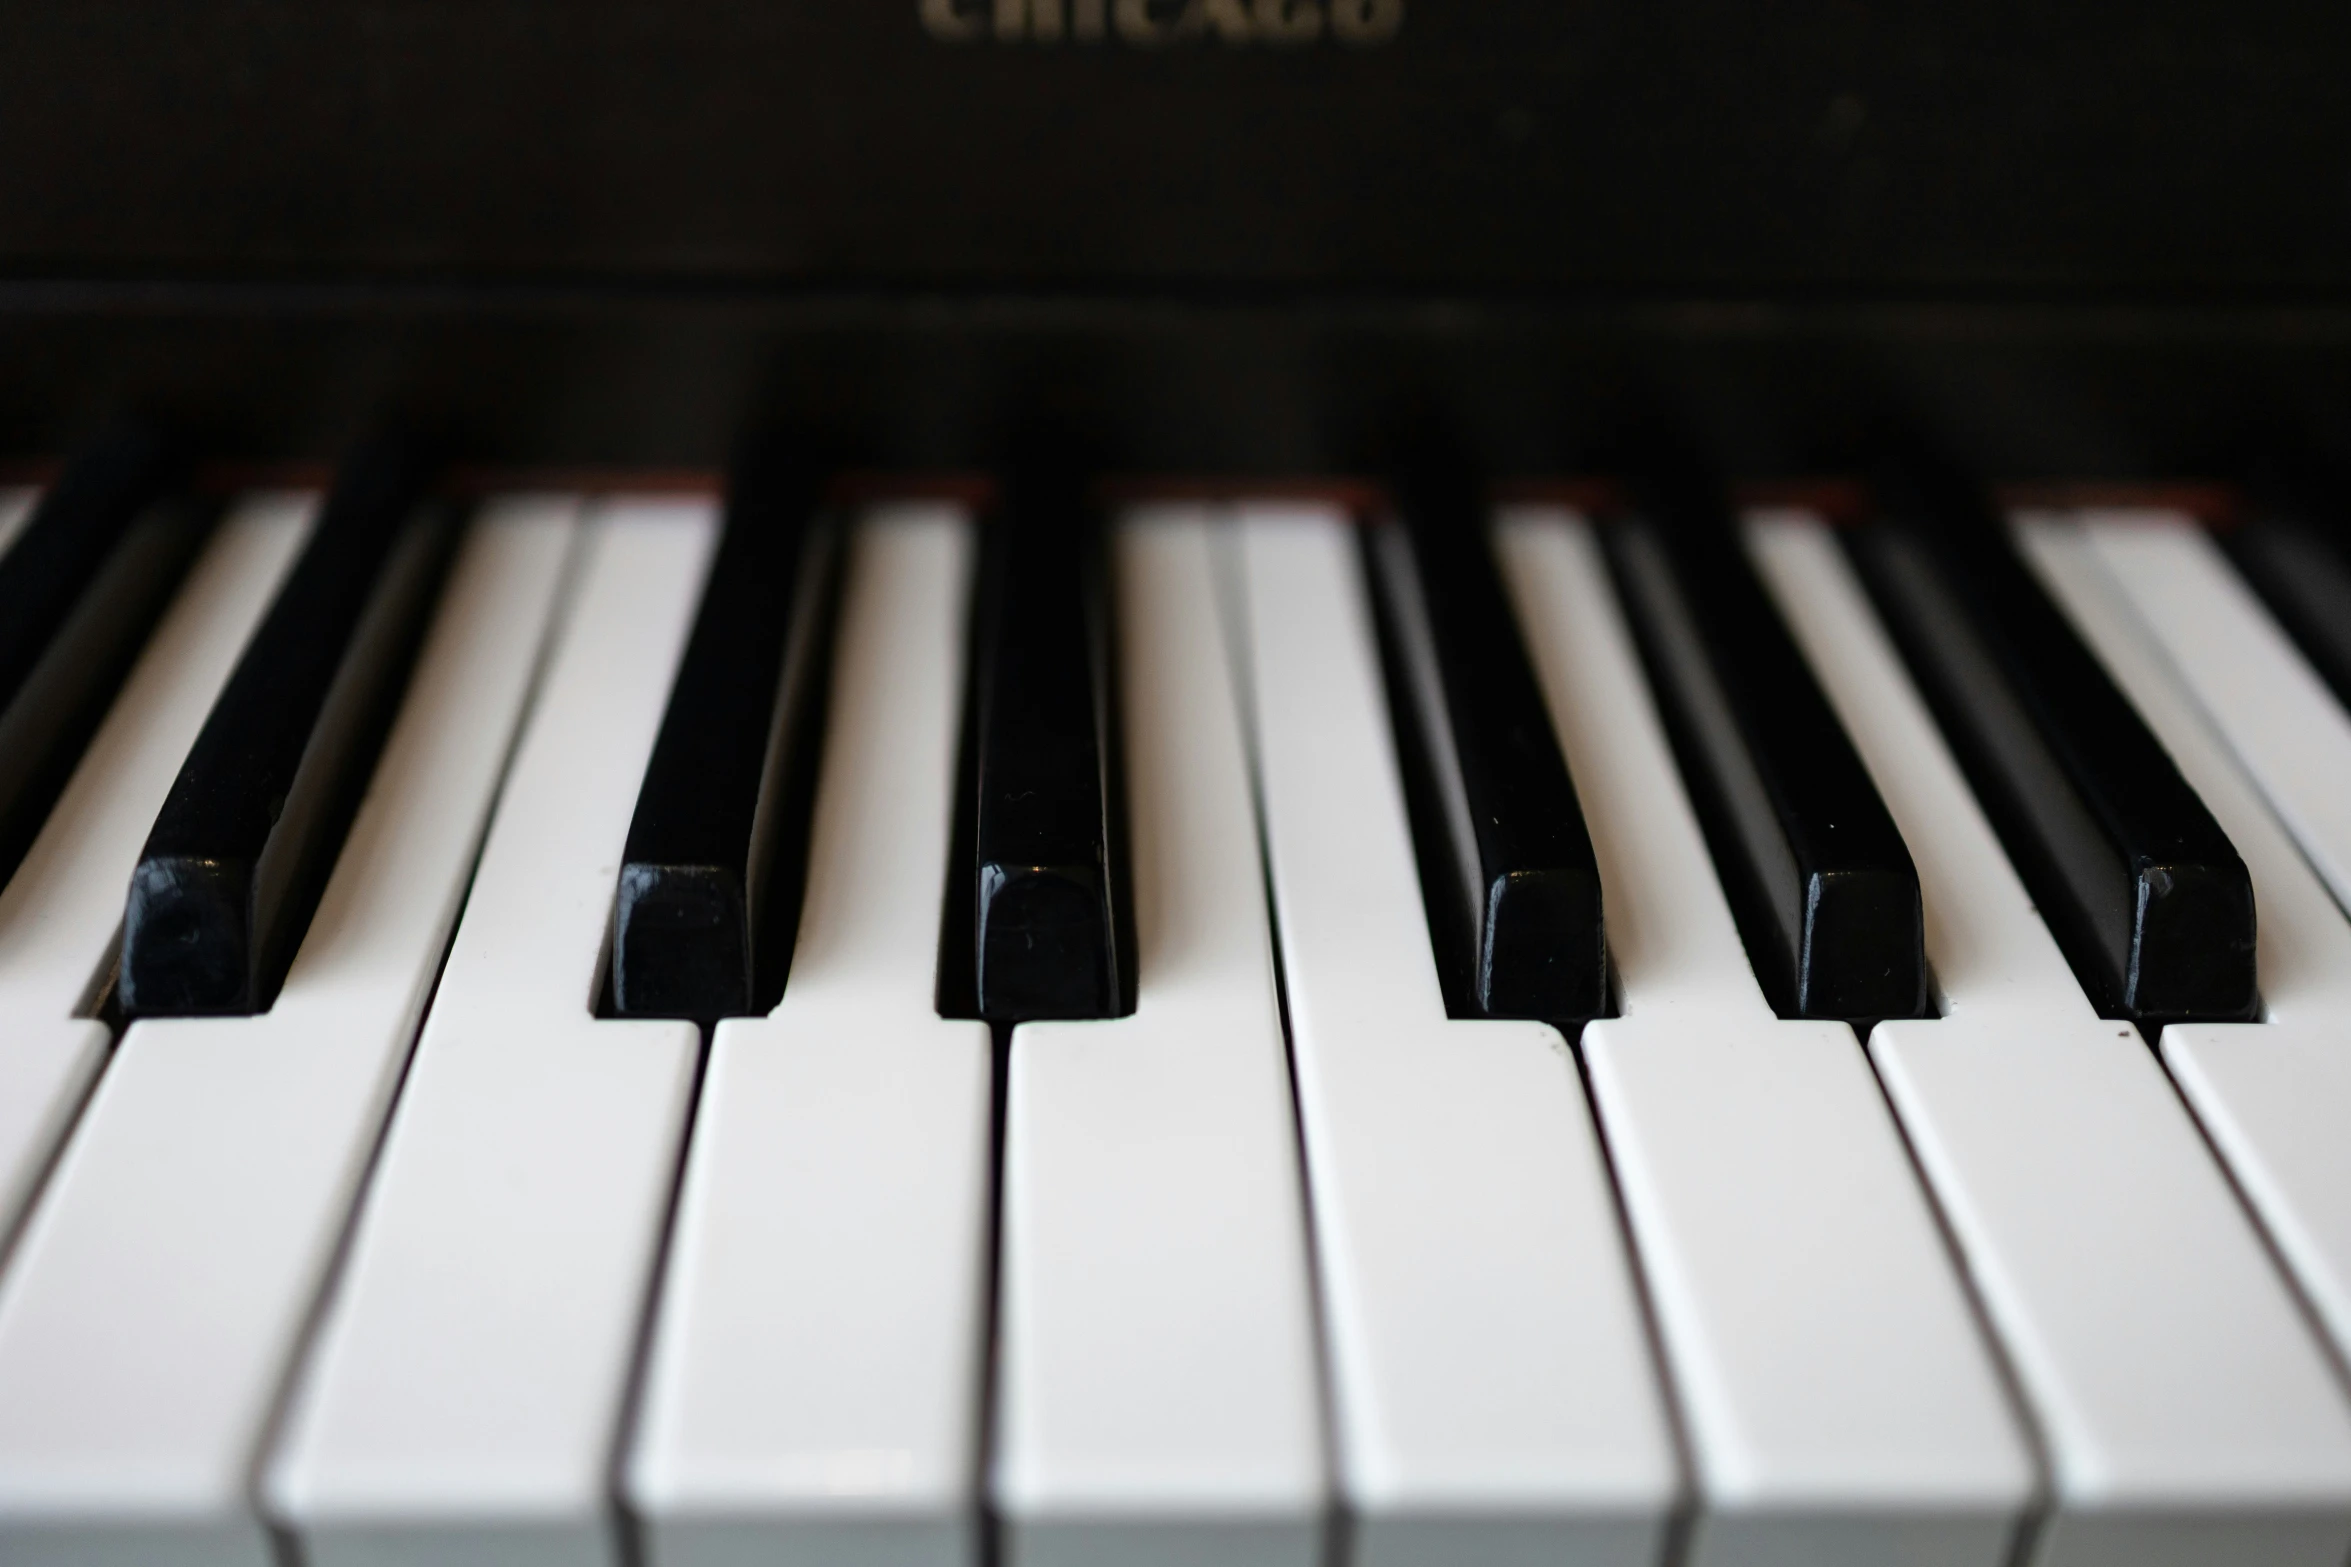 piano keys are shown here in a closeup view